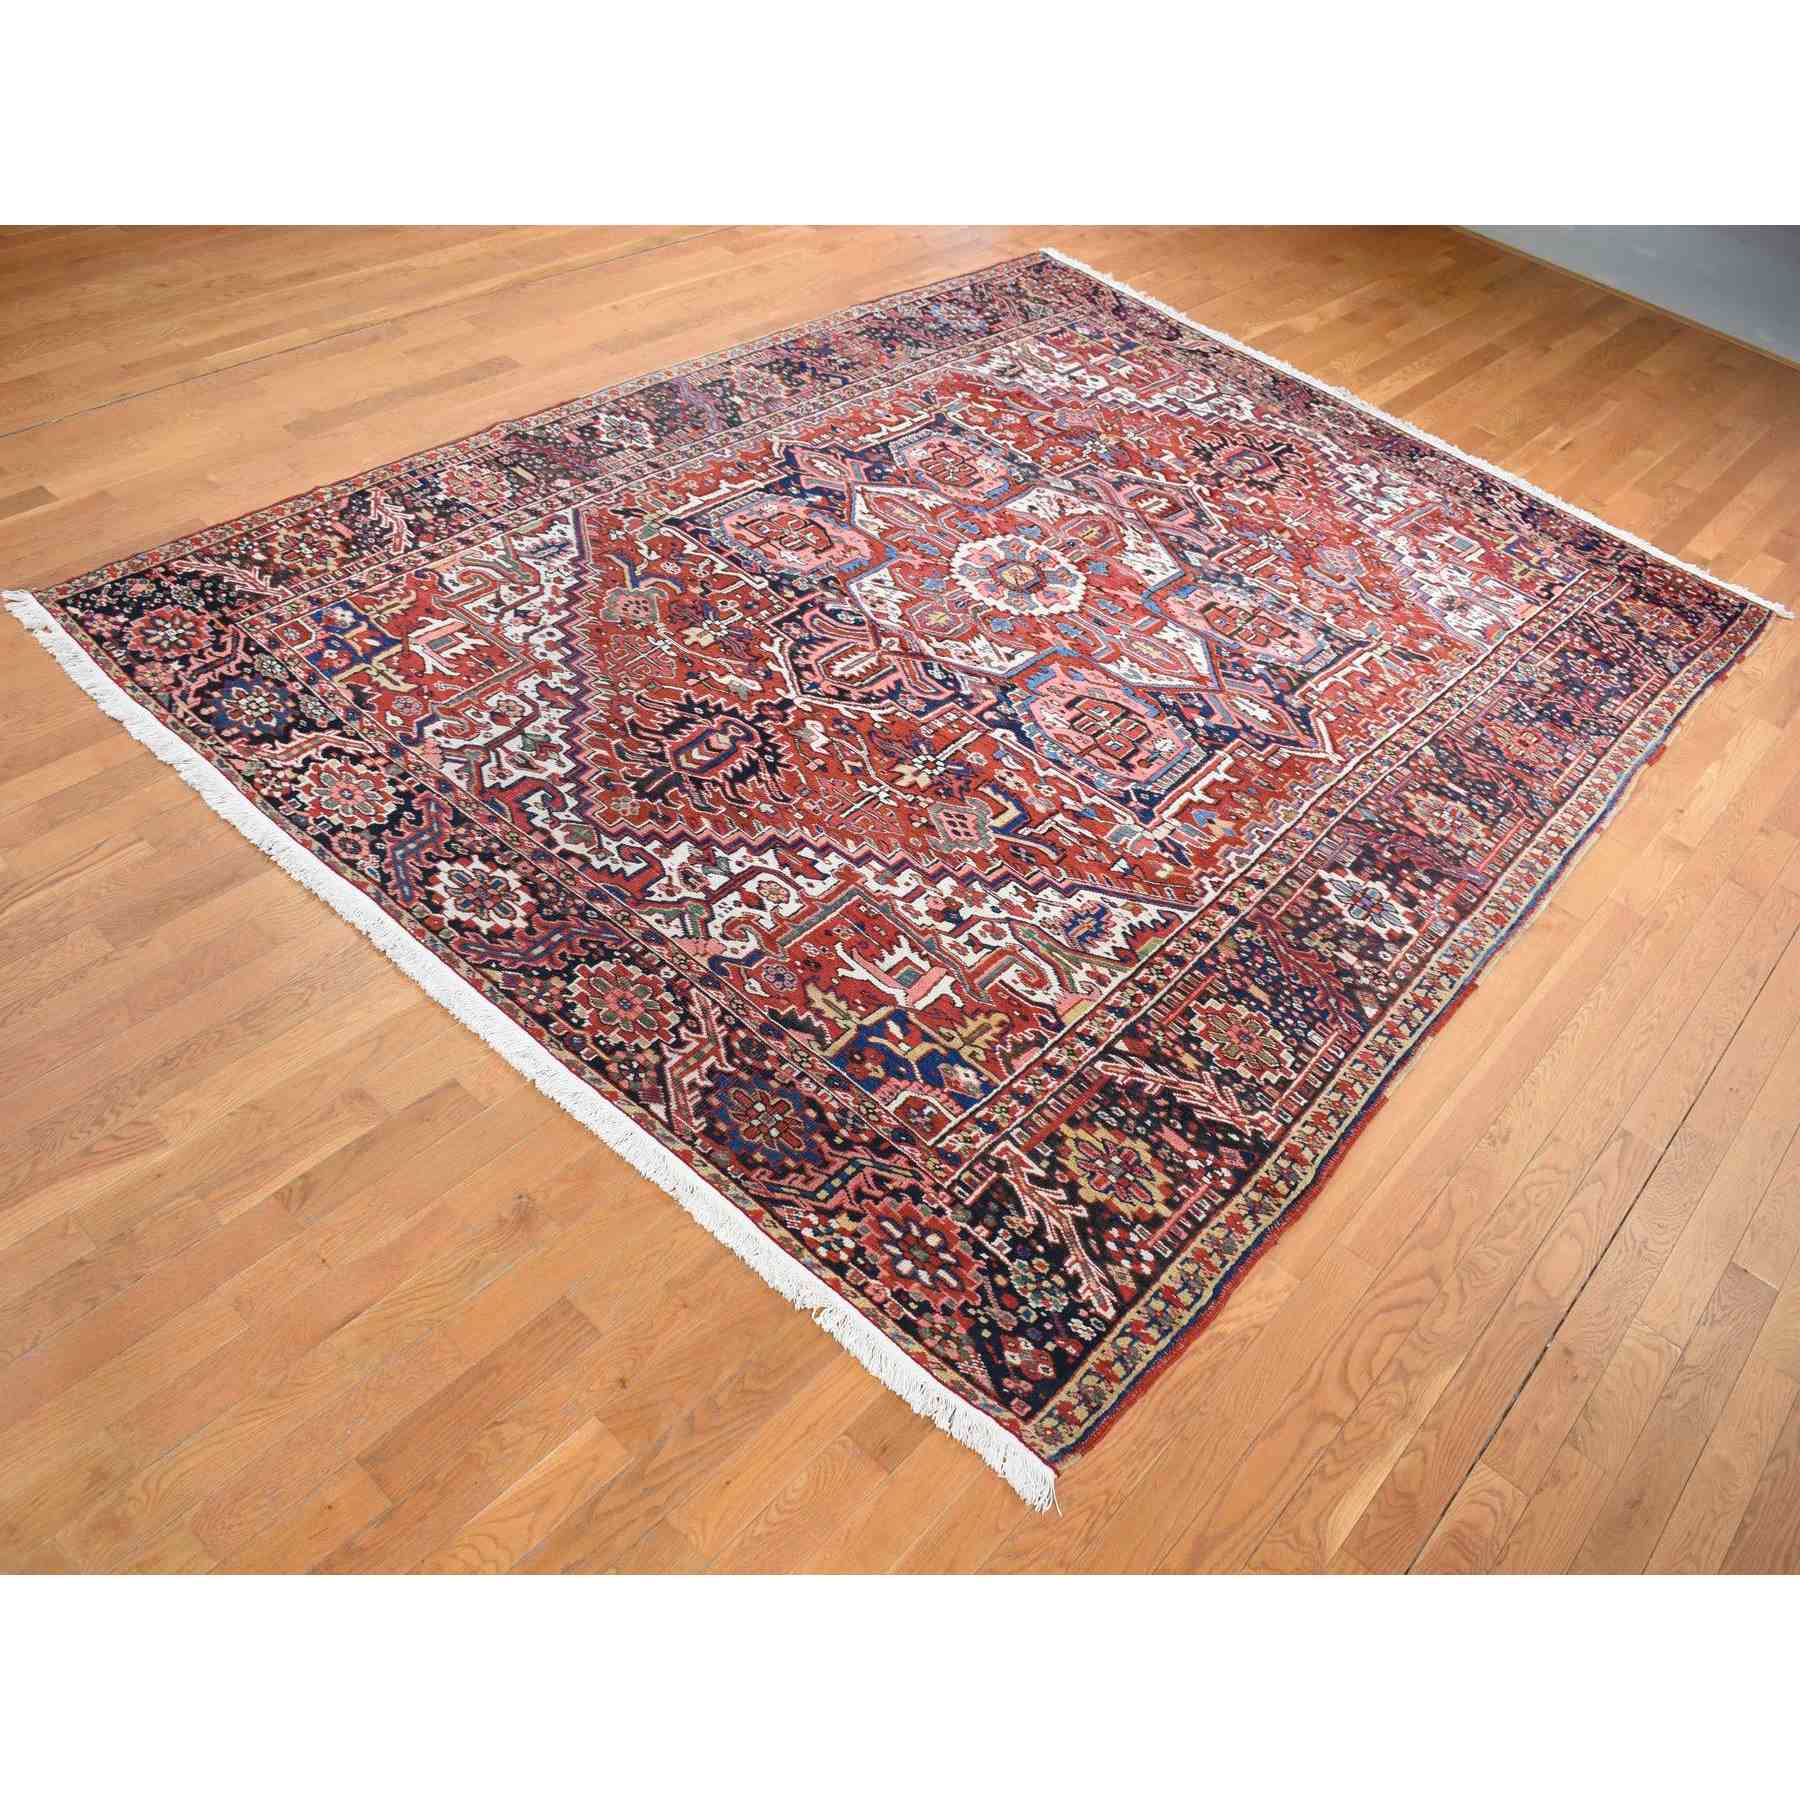 Antique-Hand-Knotted-Rug-403880